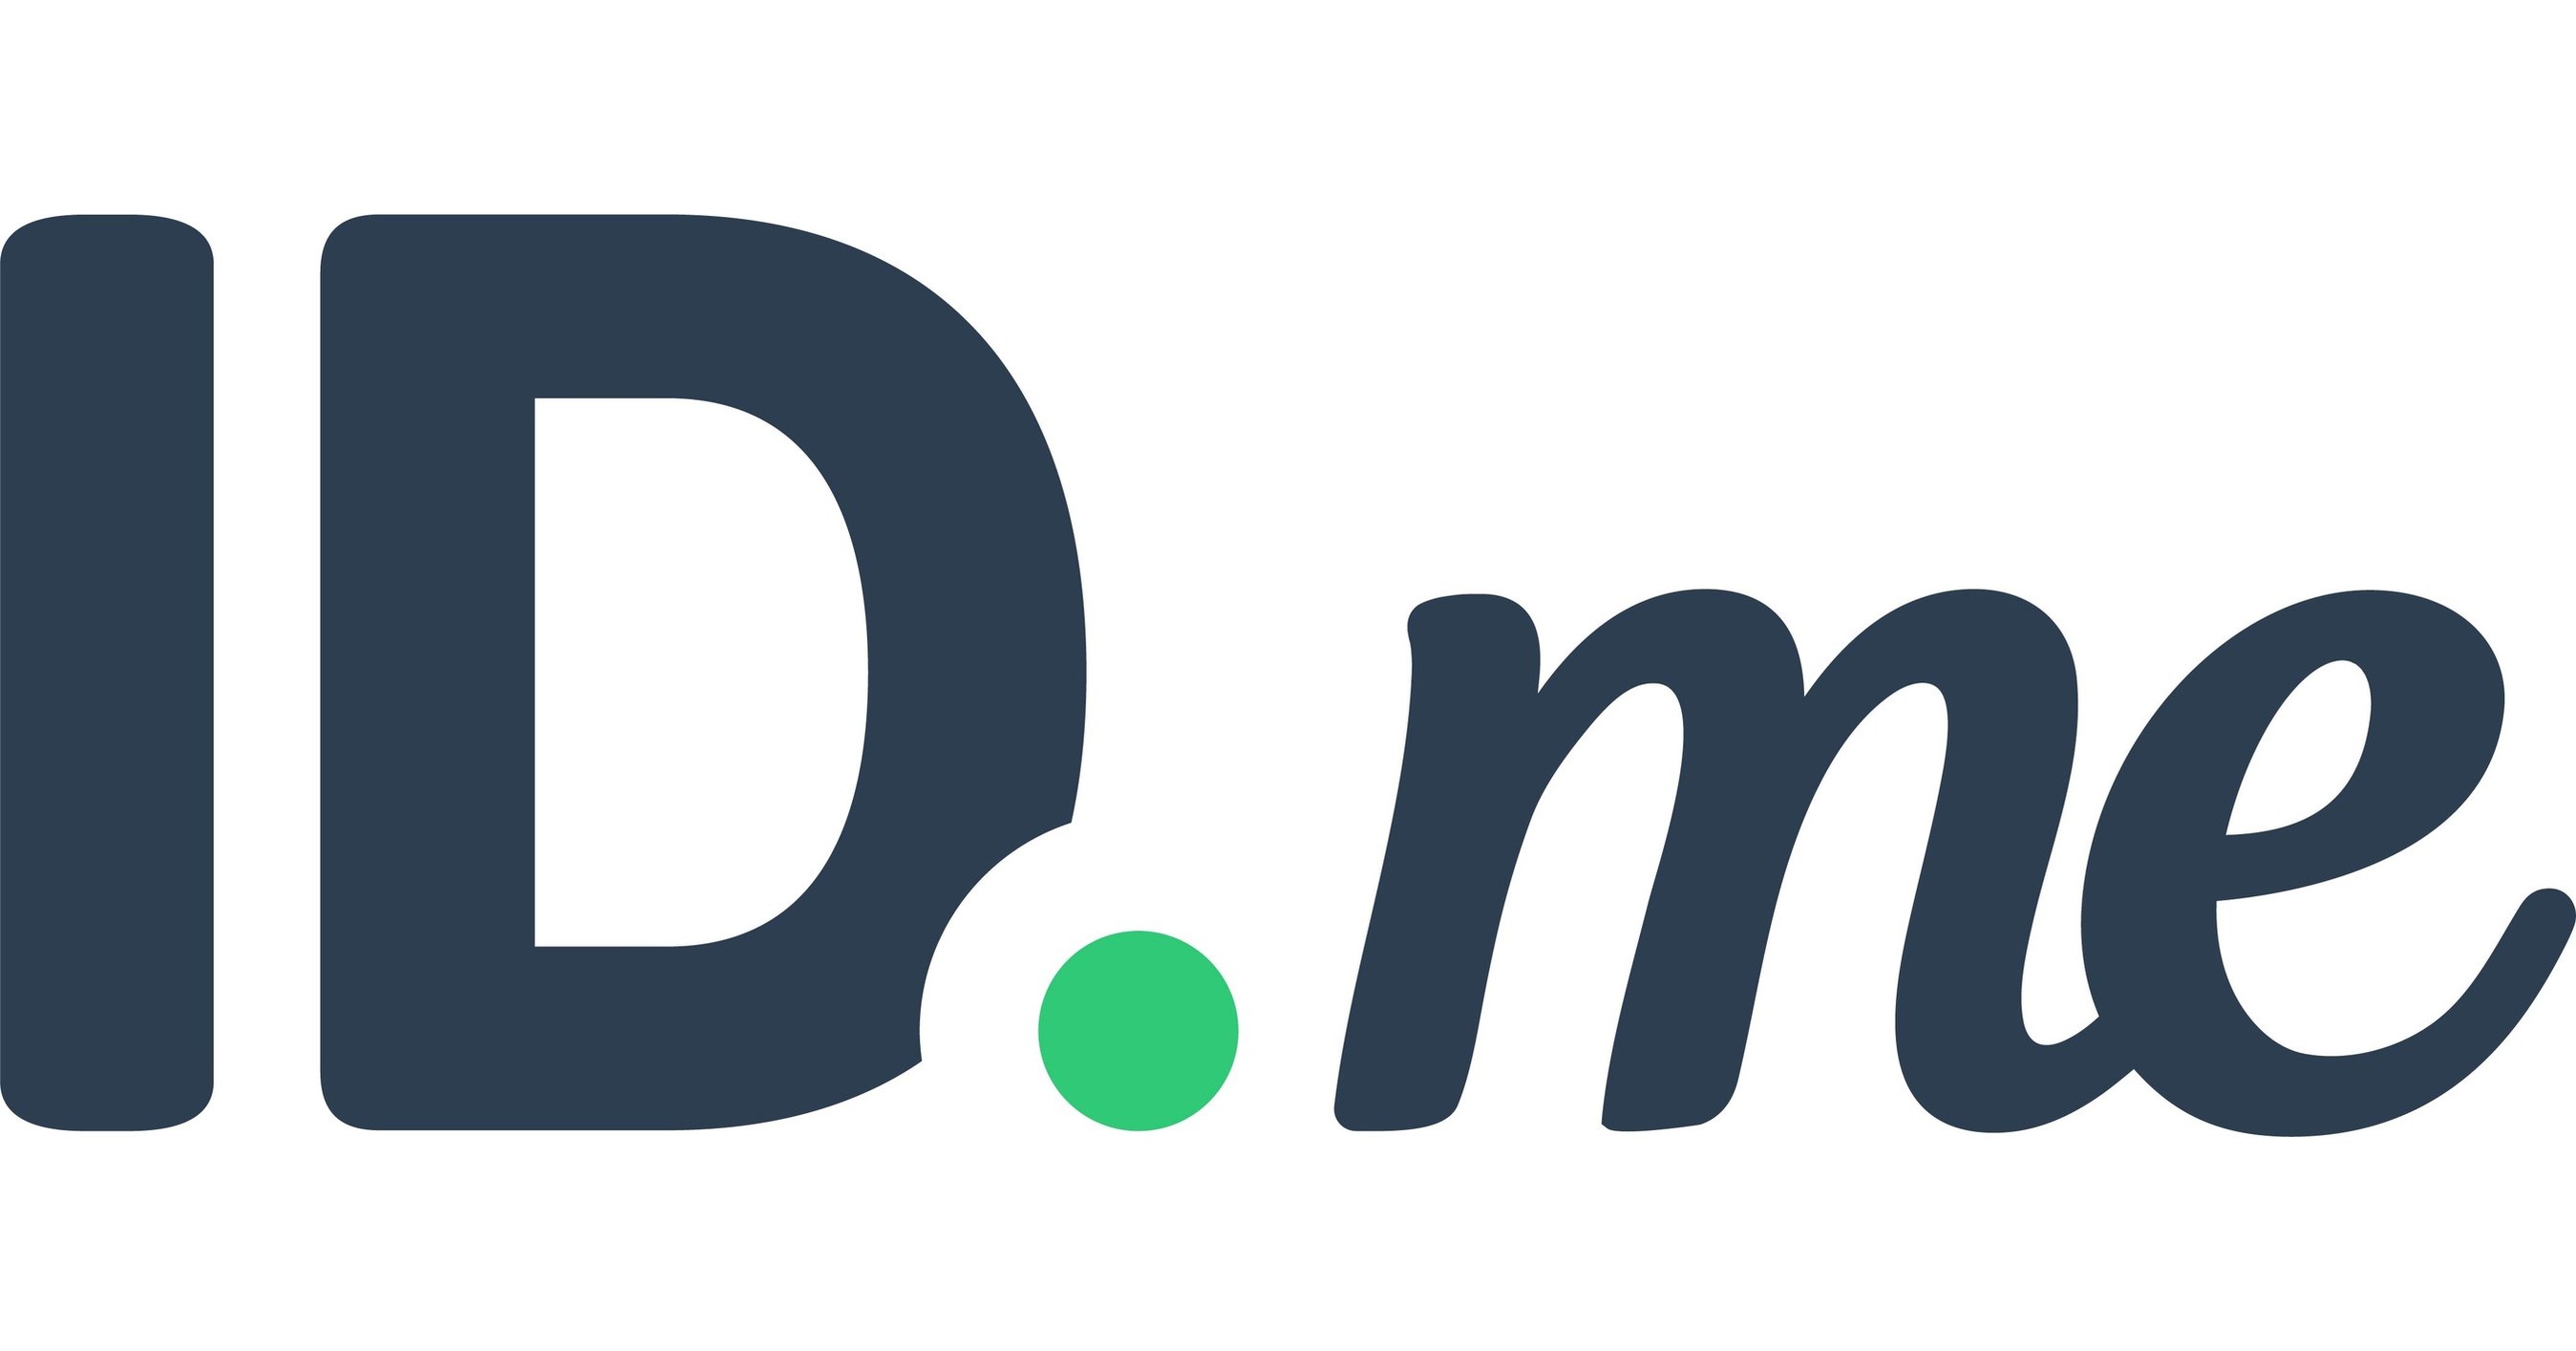 Press Releases & News - ID.me Network